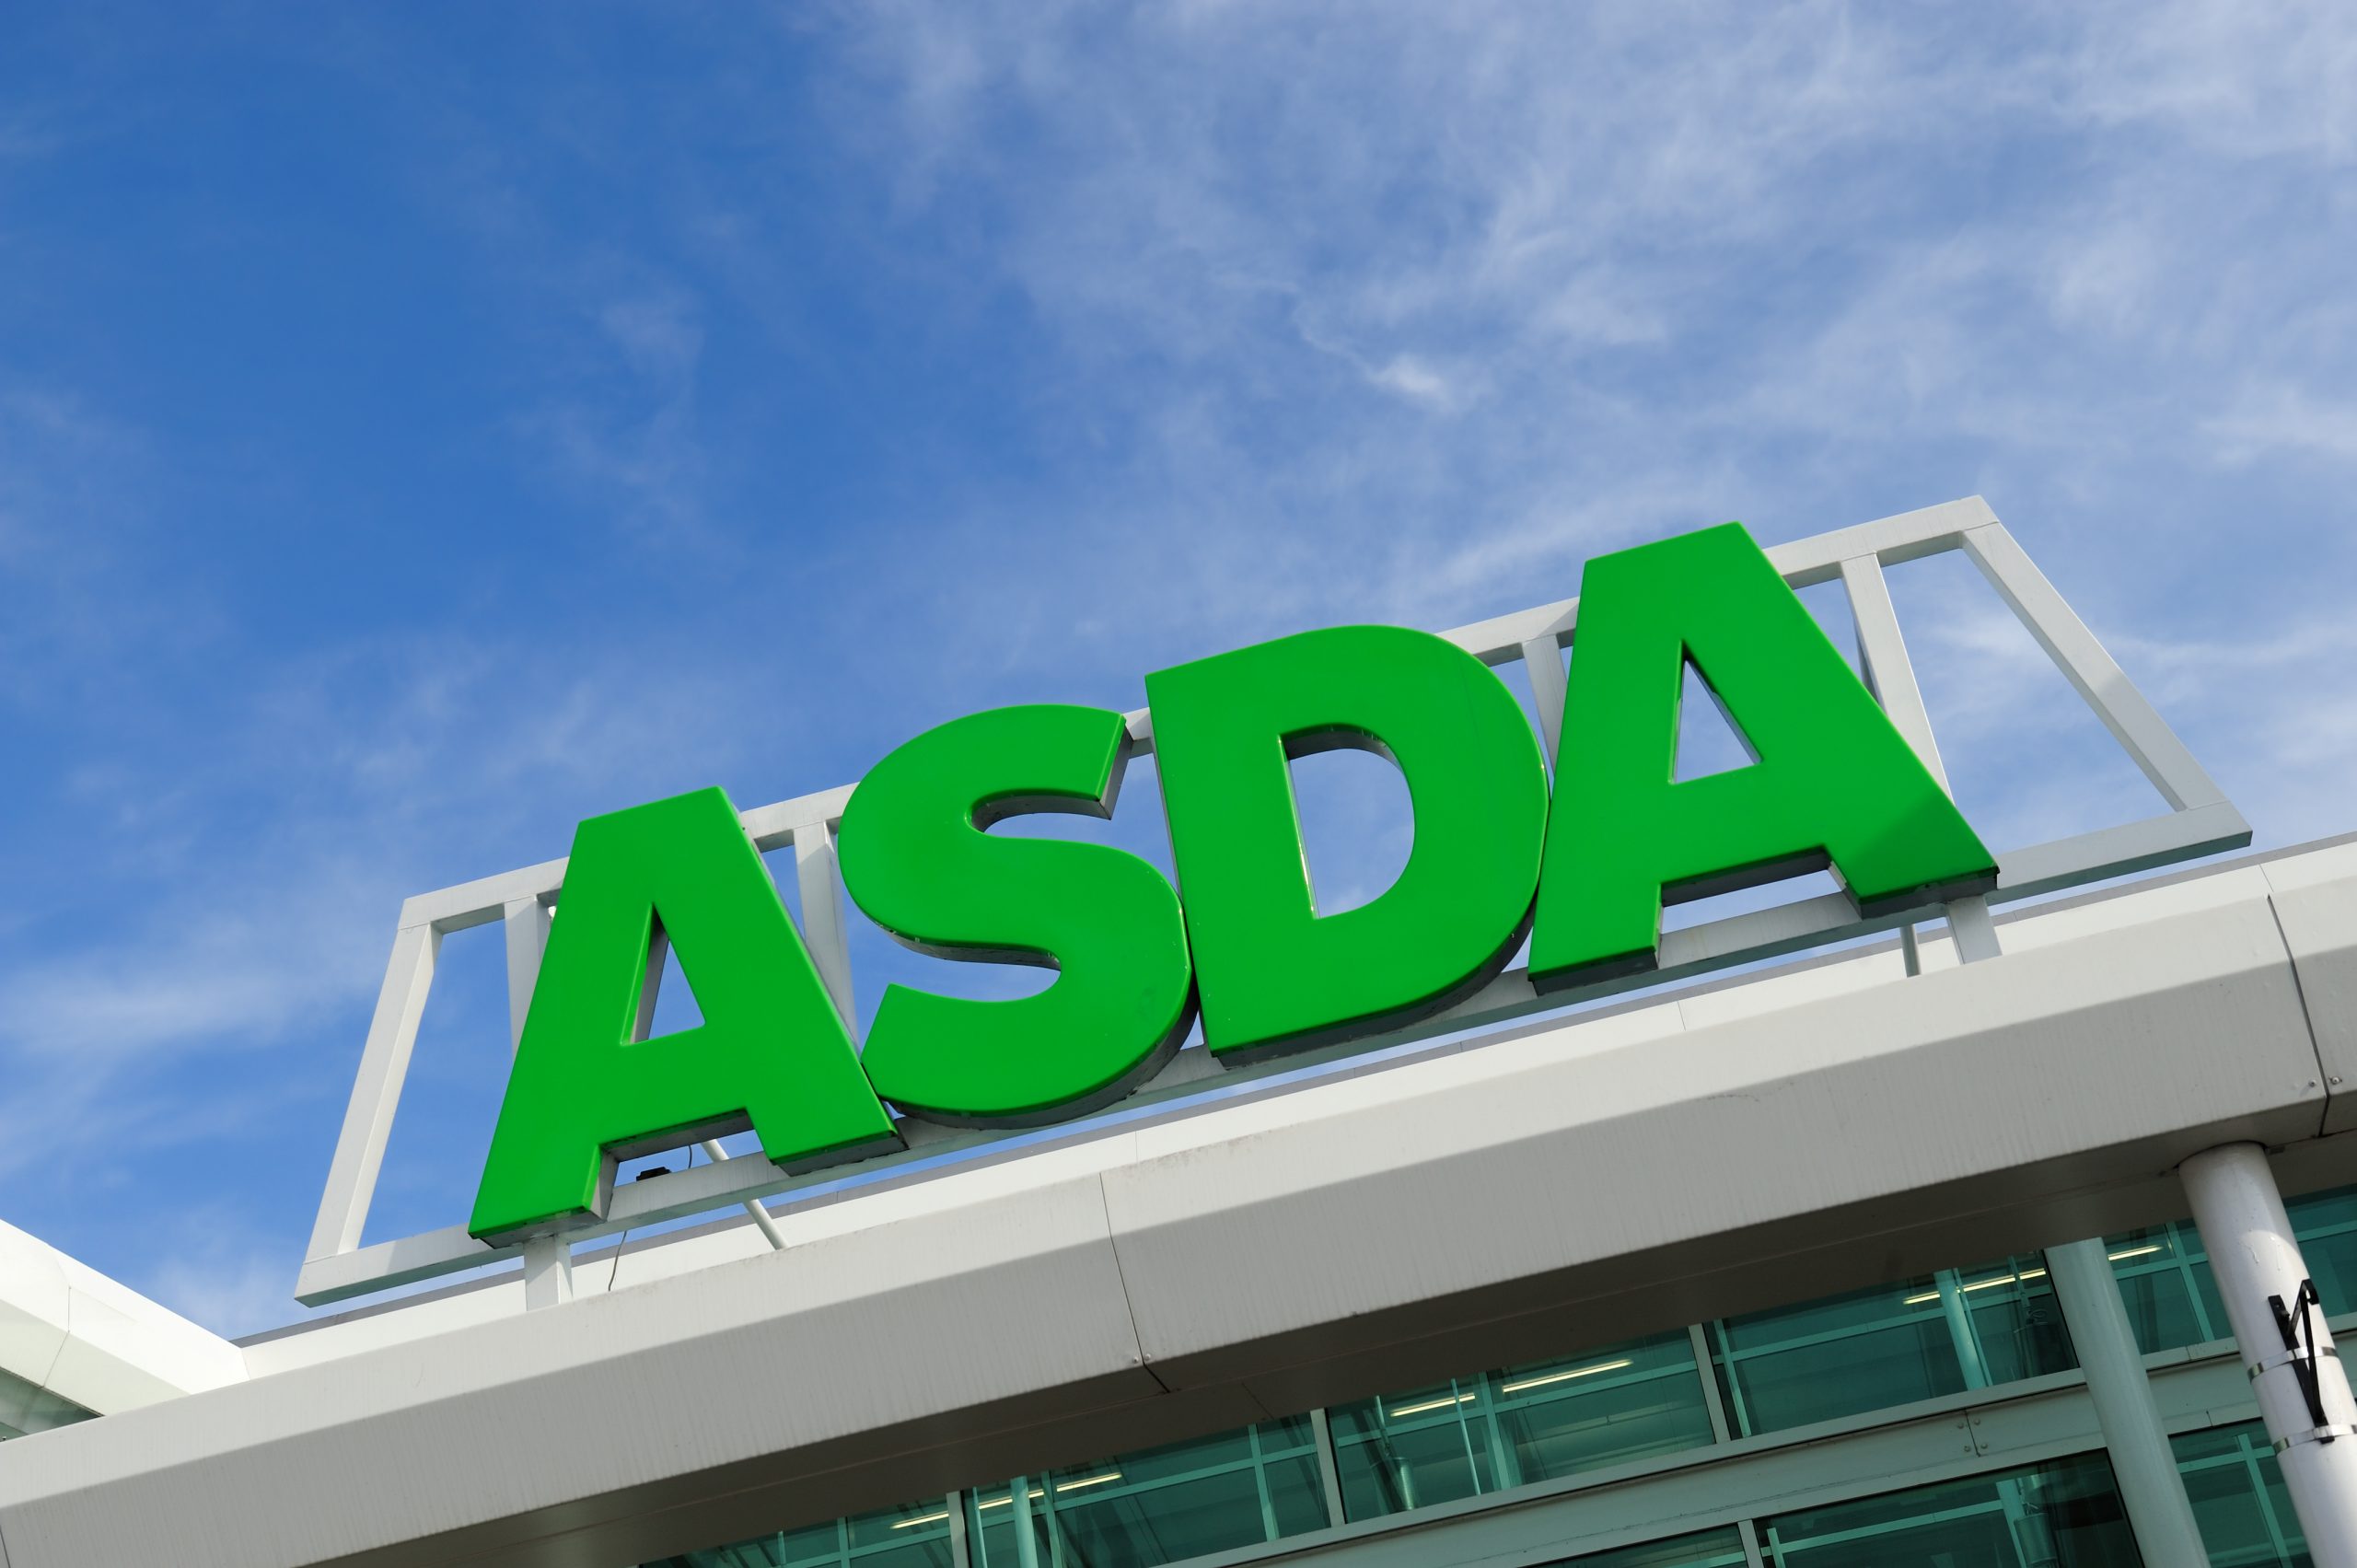 Orkney store purchased by Asda - The Orcadian Online